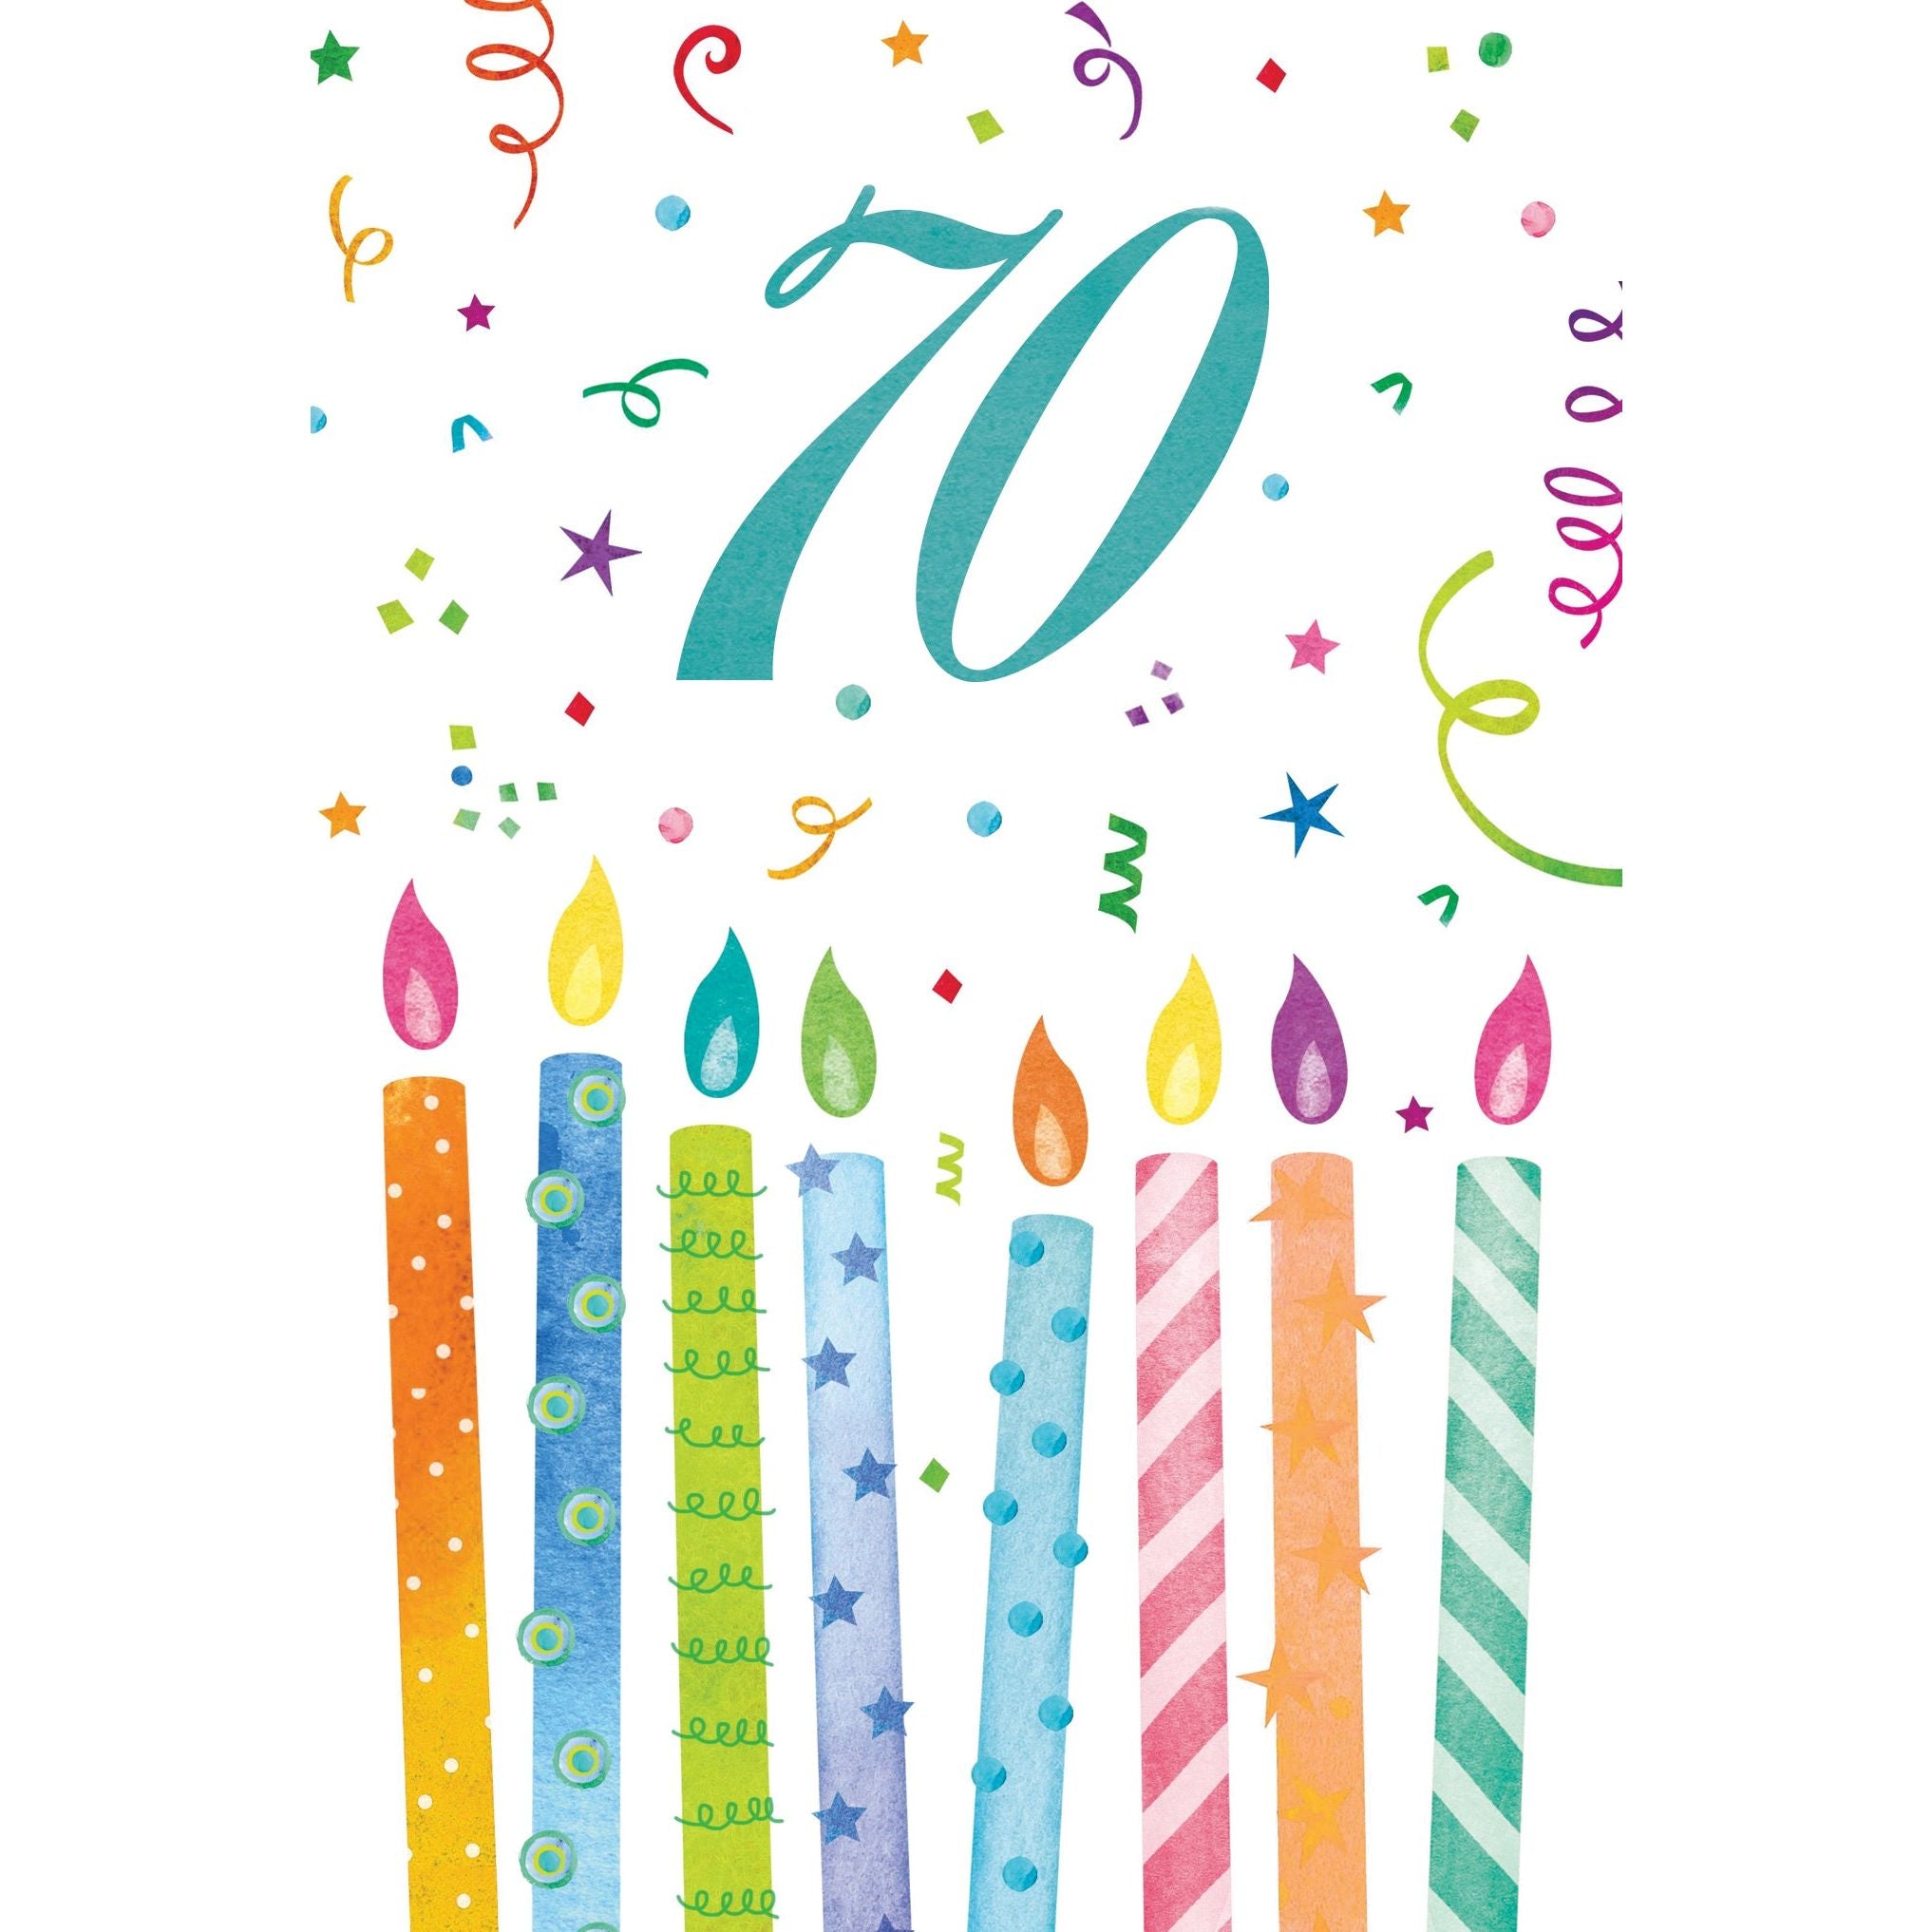 70th Birthday Card with Colorful Candles - Cardmore